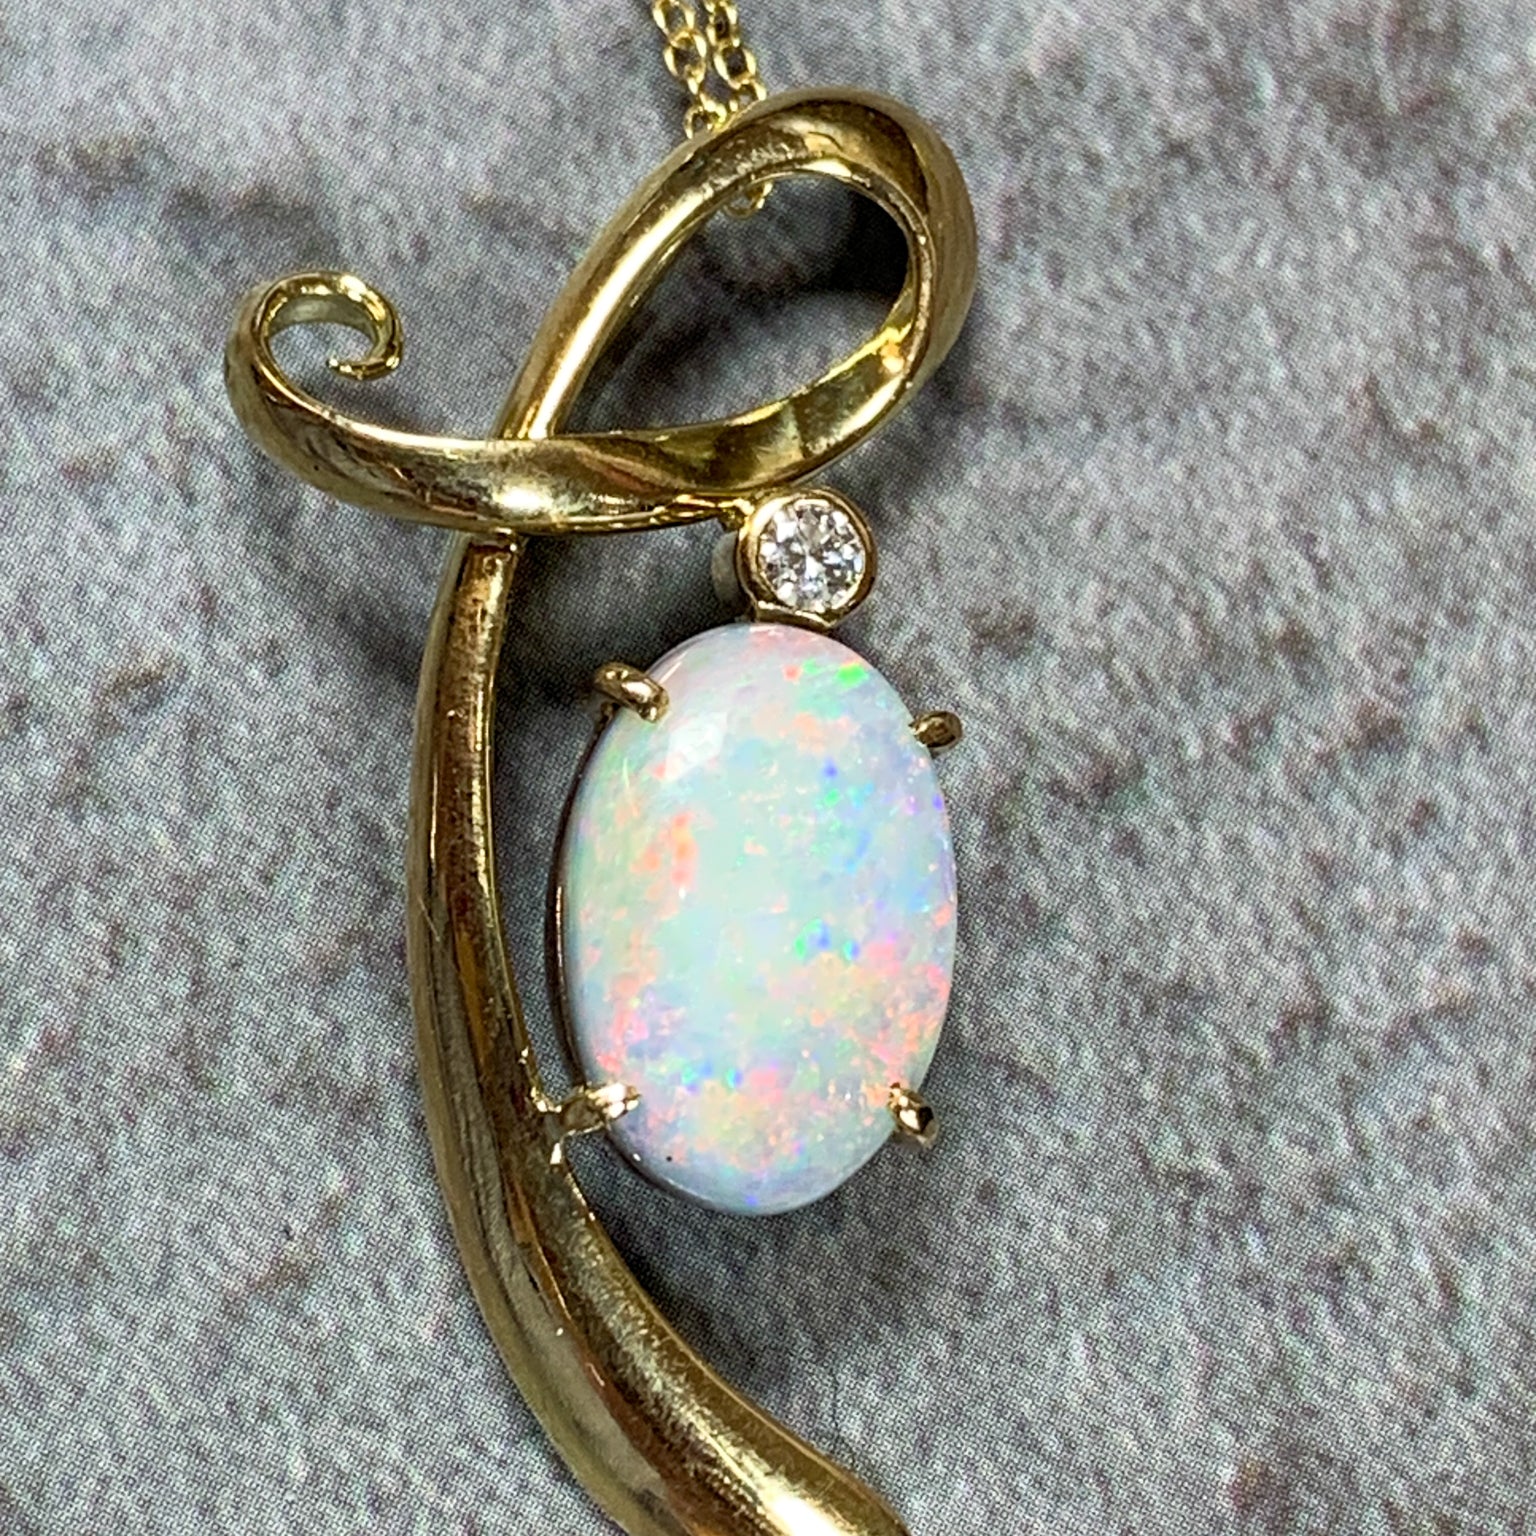 18kt Yellow Gold Black Opal Necklace with Opal 4.7ct and 0.1ct Diamond pendant - Masterpiece Jewellery Opal & Gems Sydney Australia | Online Shop